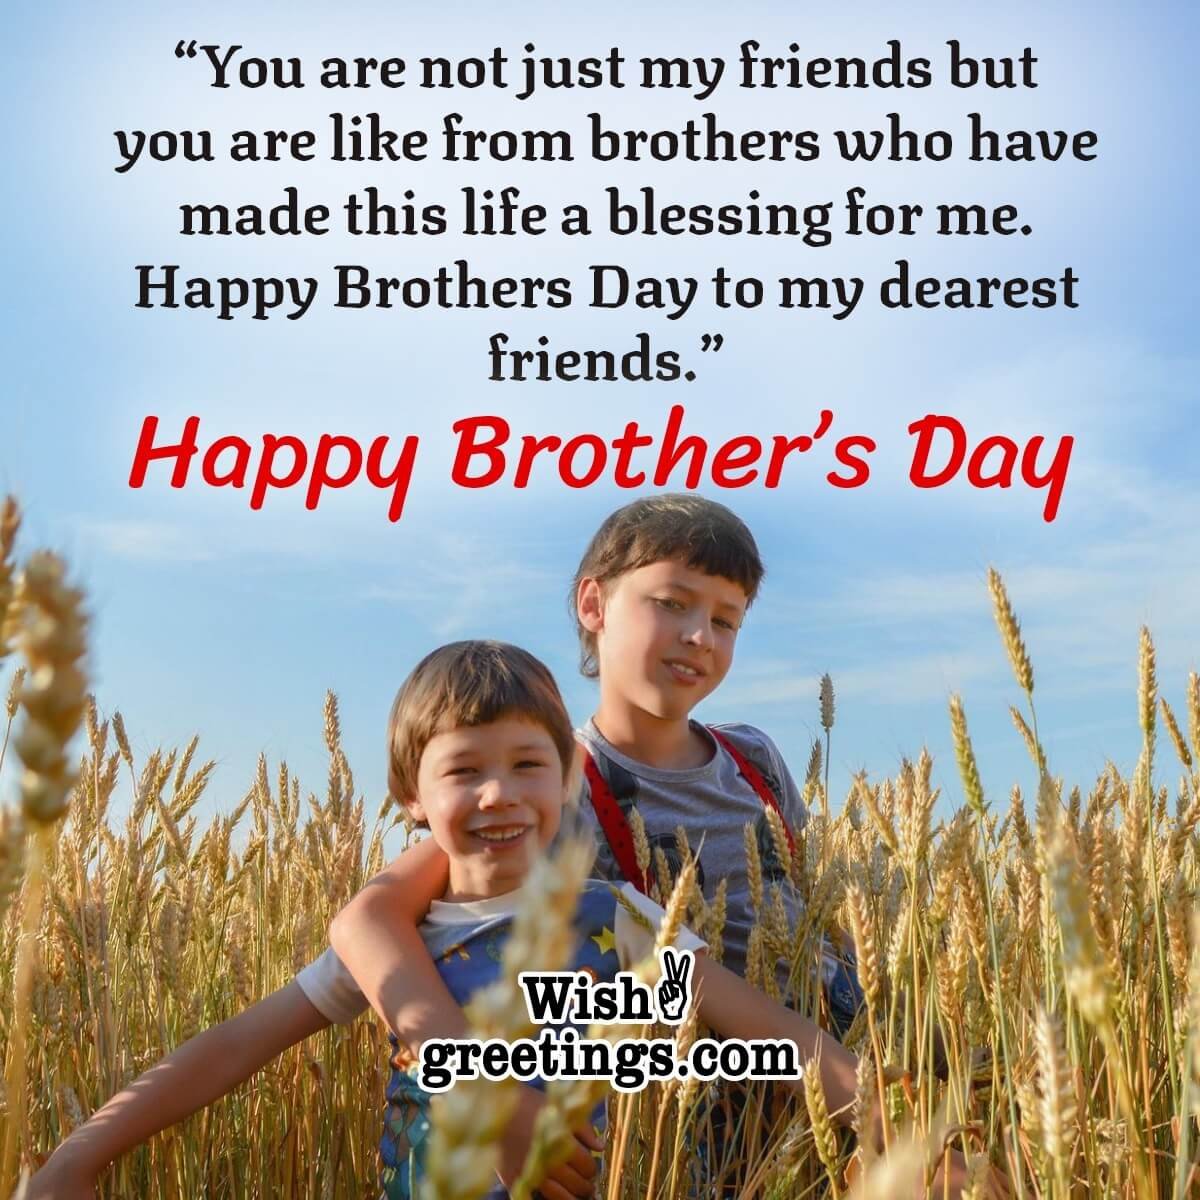 Brothers Day Quotes For Friends